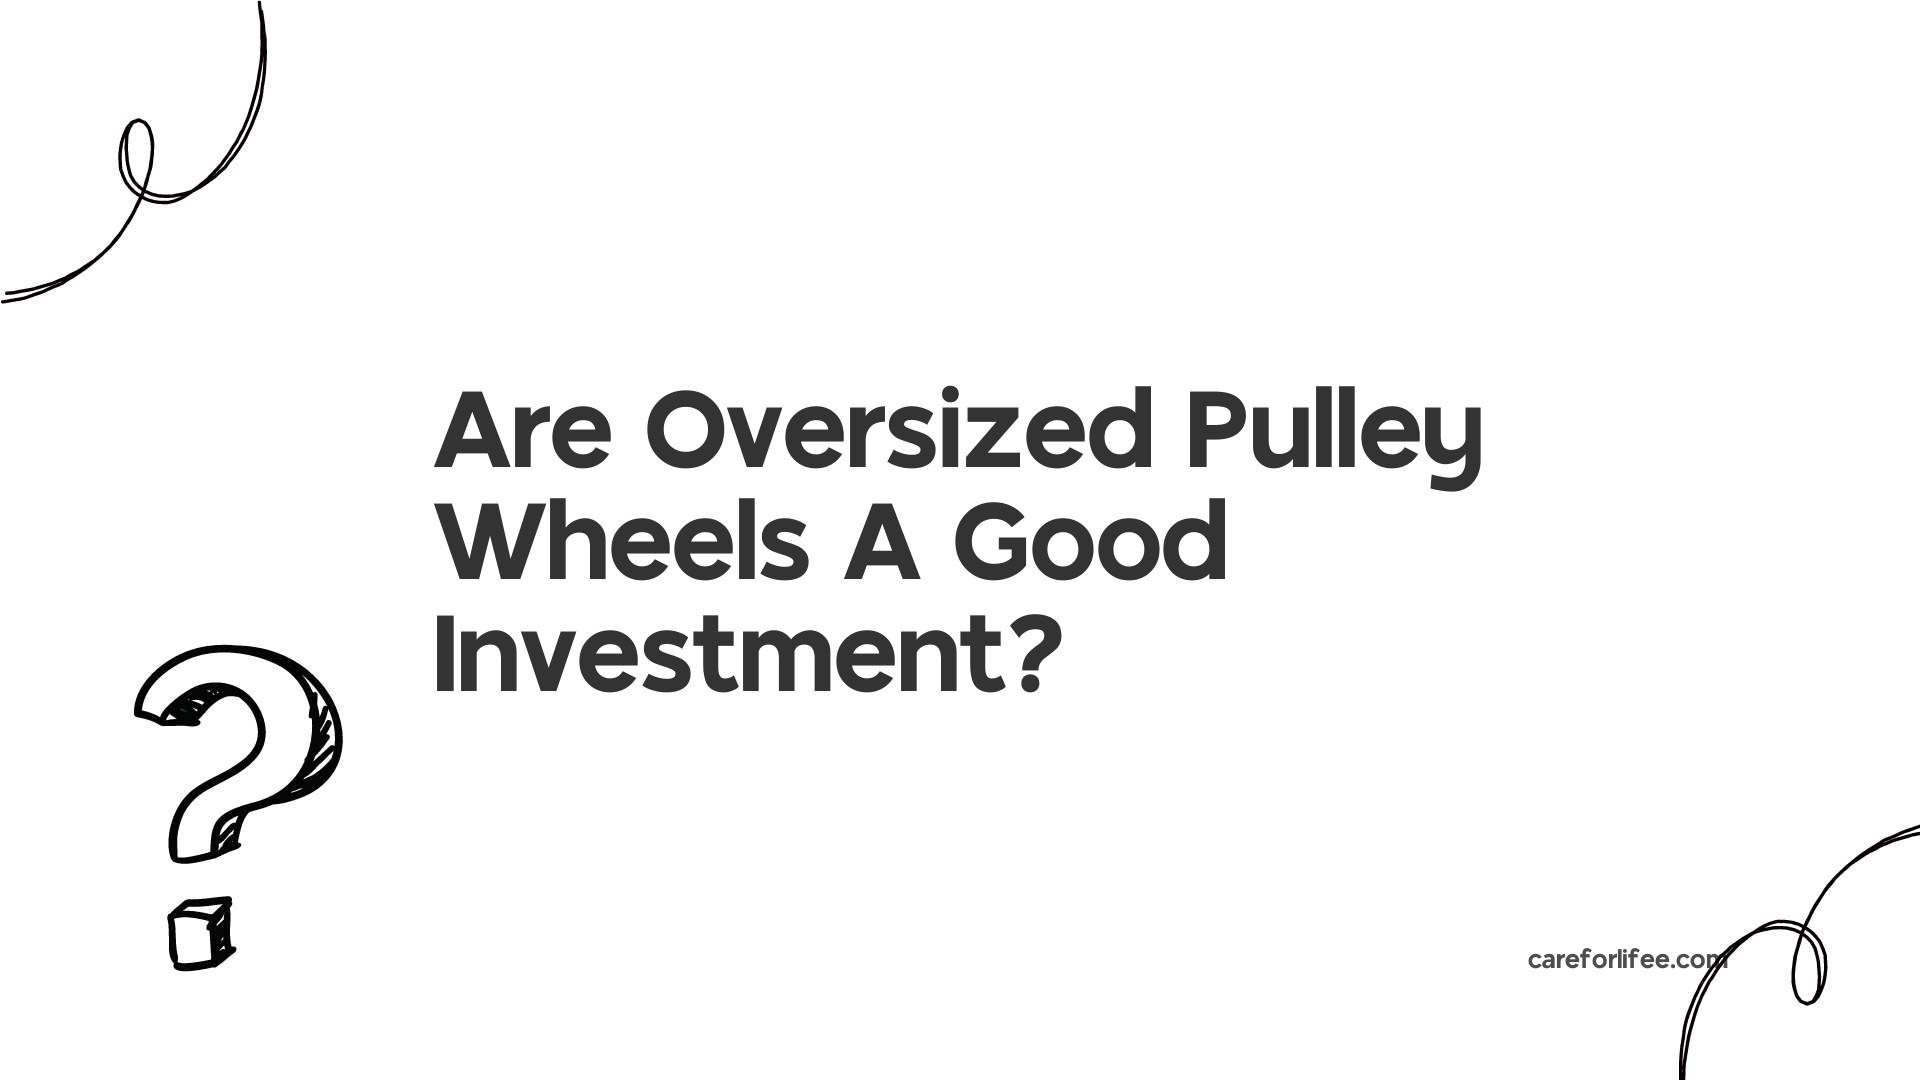 Are Oversized Pulley Wheels A Good Investment?